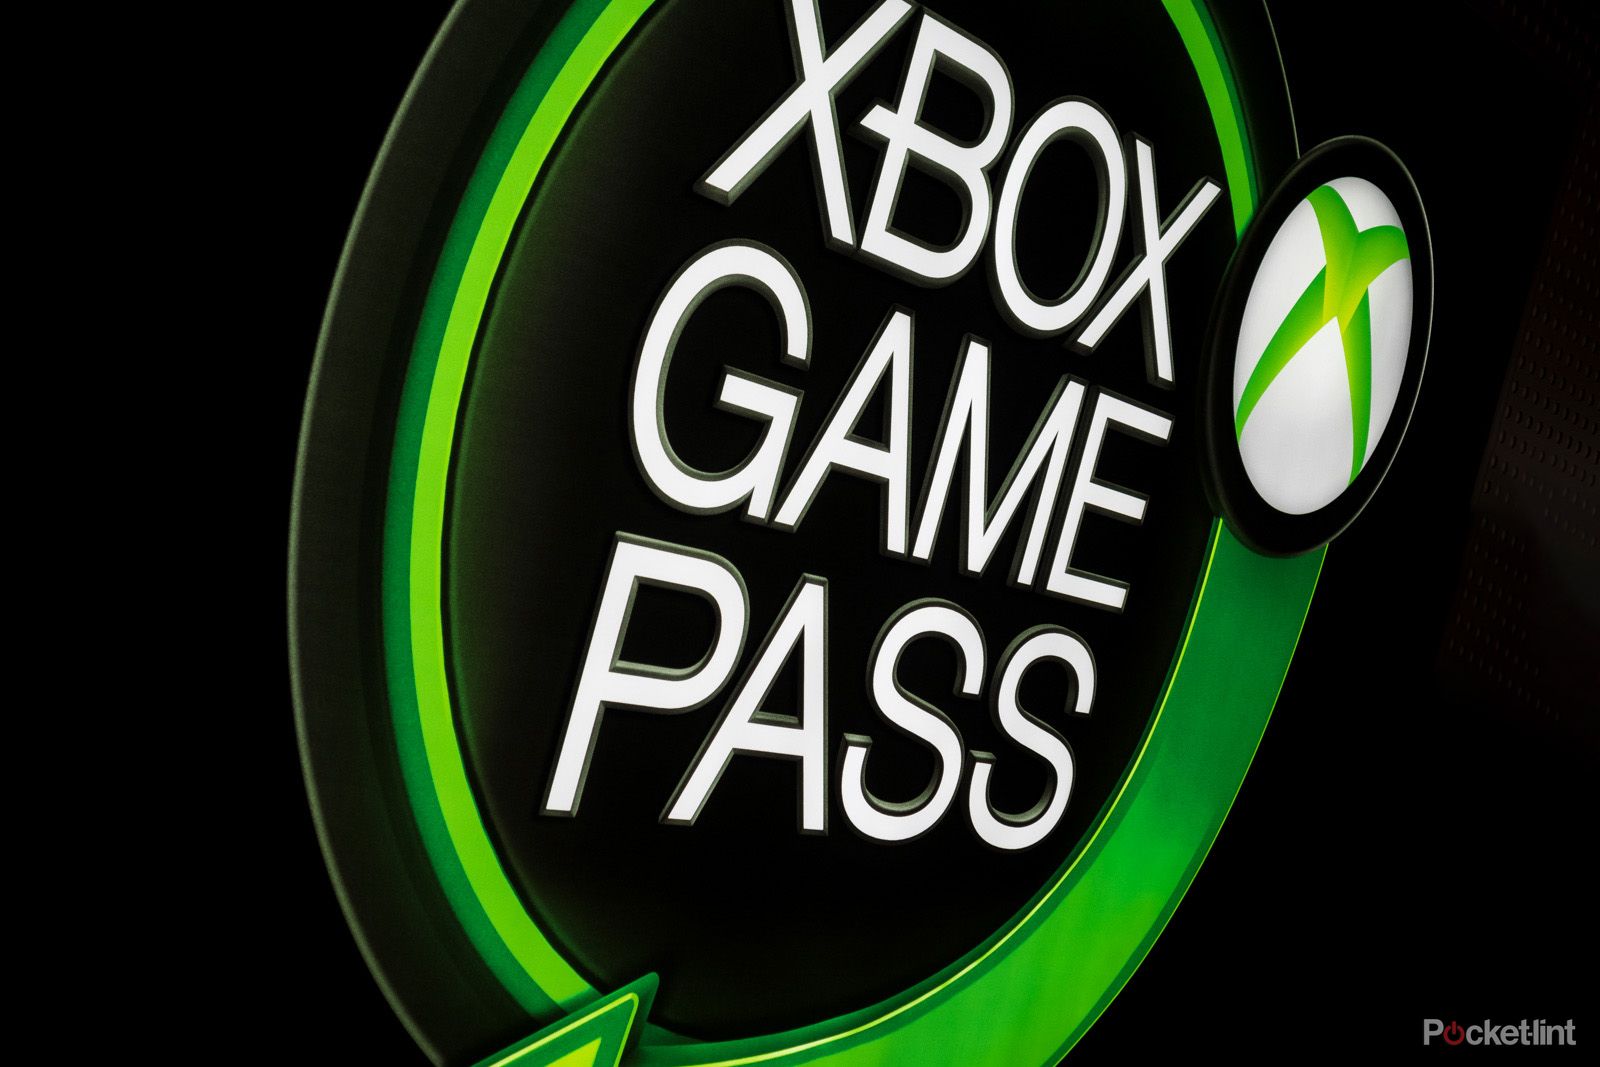 BT broadband customers can get Xbox Game Pass Ultimate for free photo 1